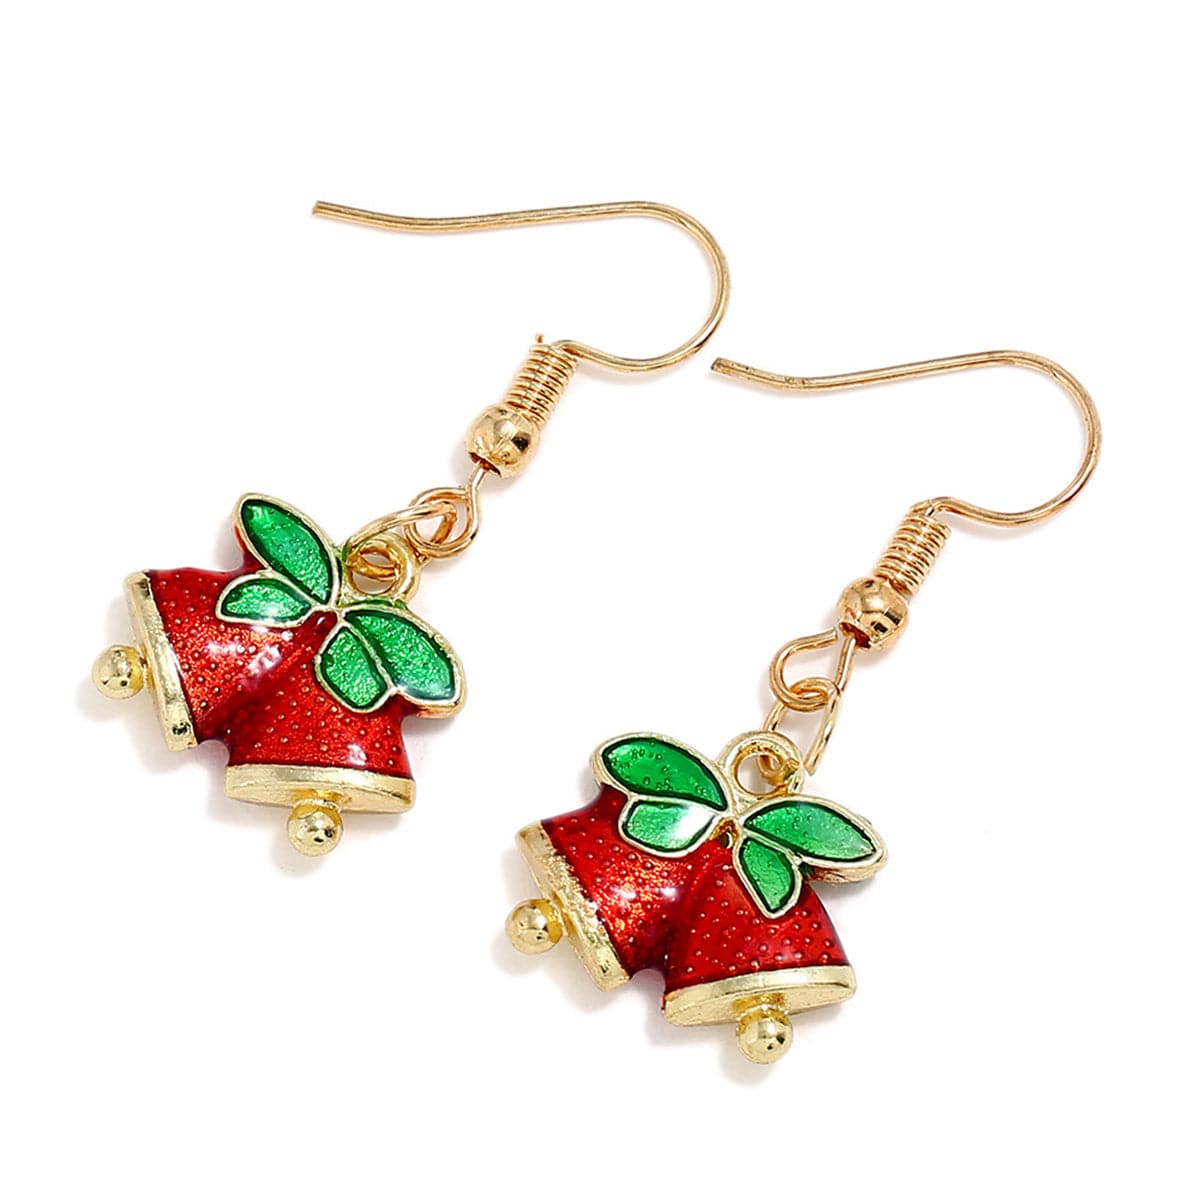 Red & 18K Gold-Plated Bell With Bow Drop Earrings